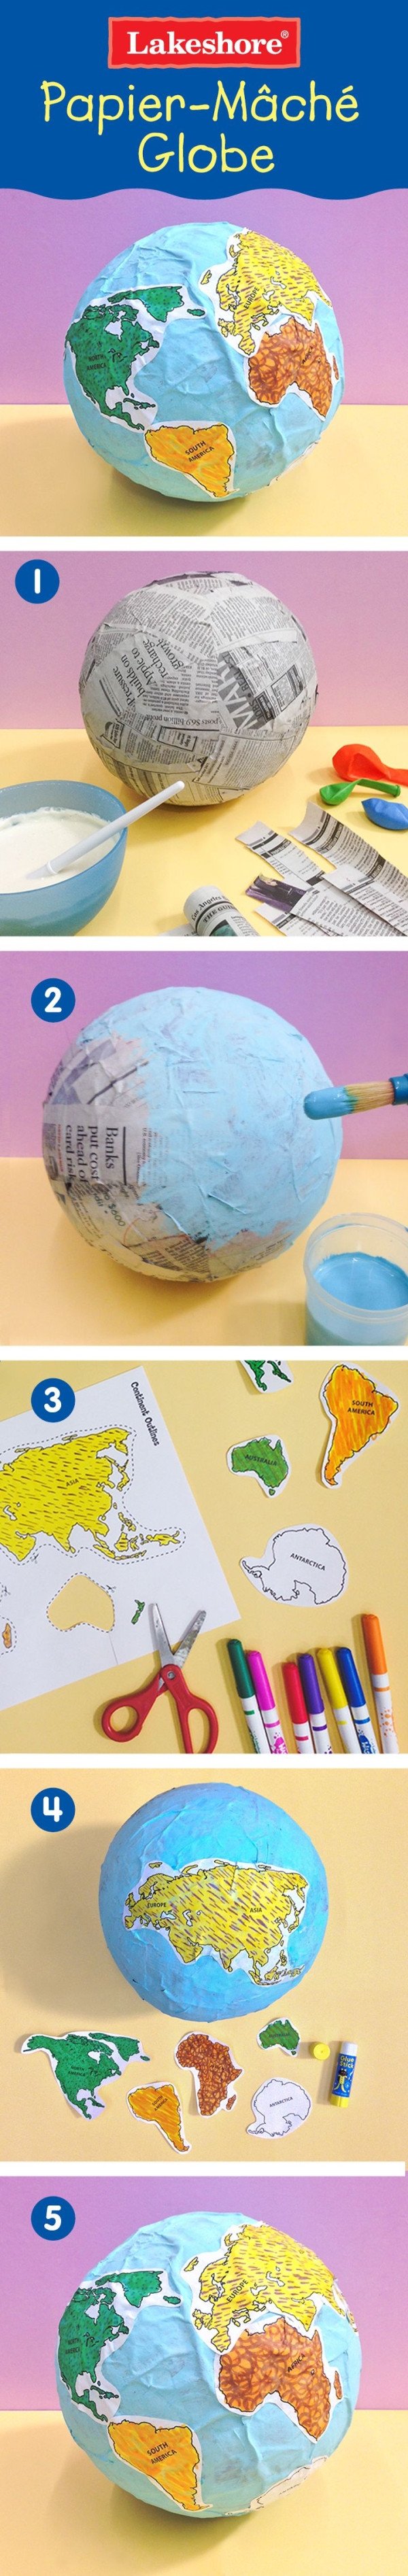 Continent Templates for Globe Paper Mache Globe Project with Printable Continent